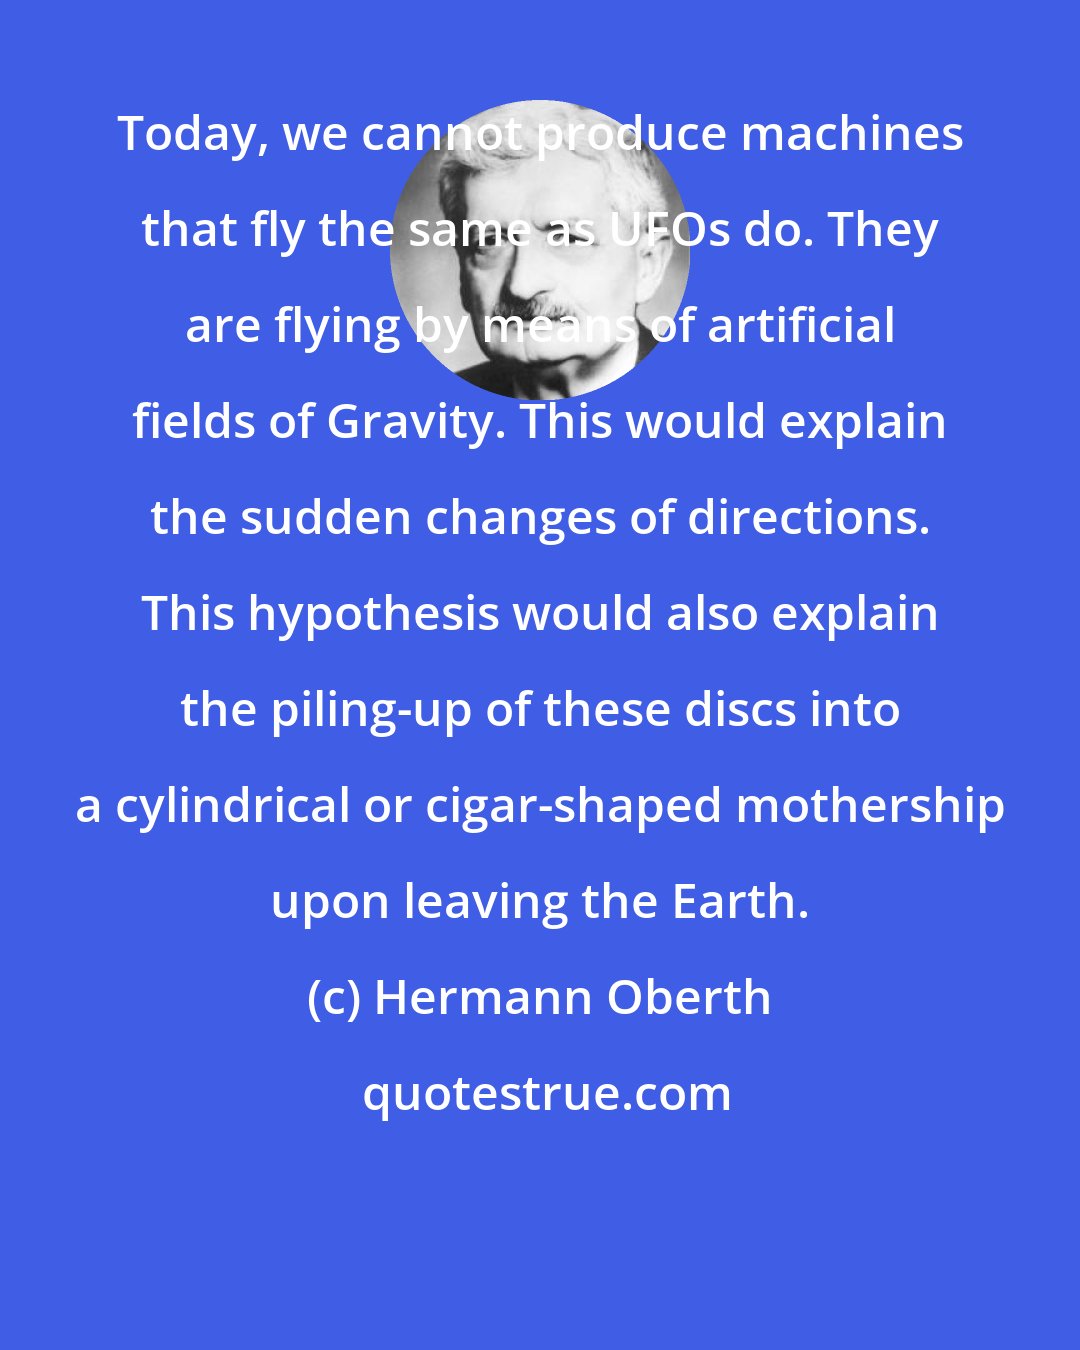 Hermann Oberth: Today, we cannot produce machines that fly the same as UFOs do. They are flying by means of artificial fields of Gravity. This would explain the sudden changes of directions. This hypothesis would also explain the piling-up of these discs into a cylindrical or cigar-shaped mothership upon leaving the Earth.